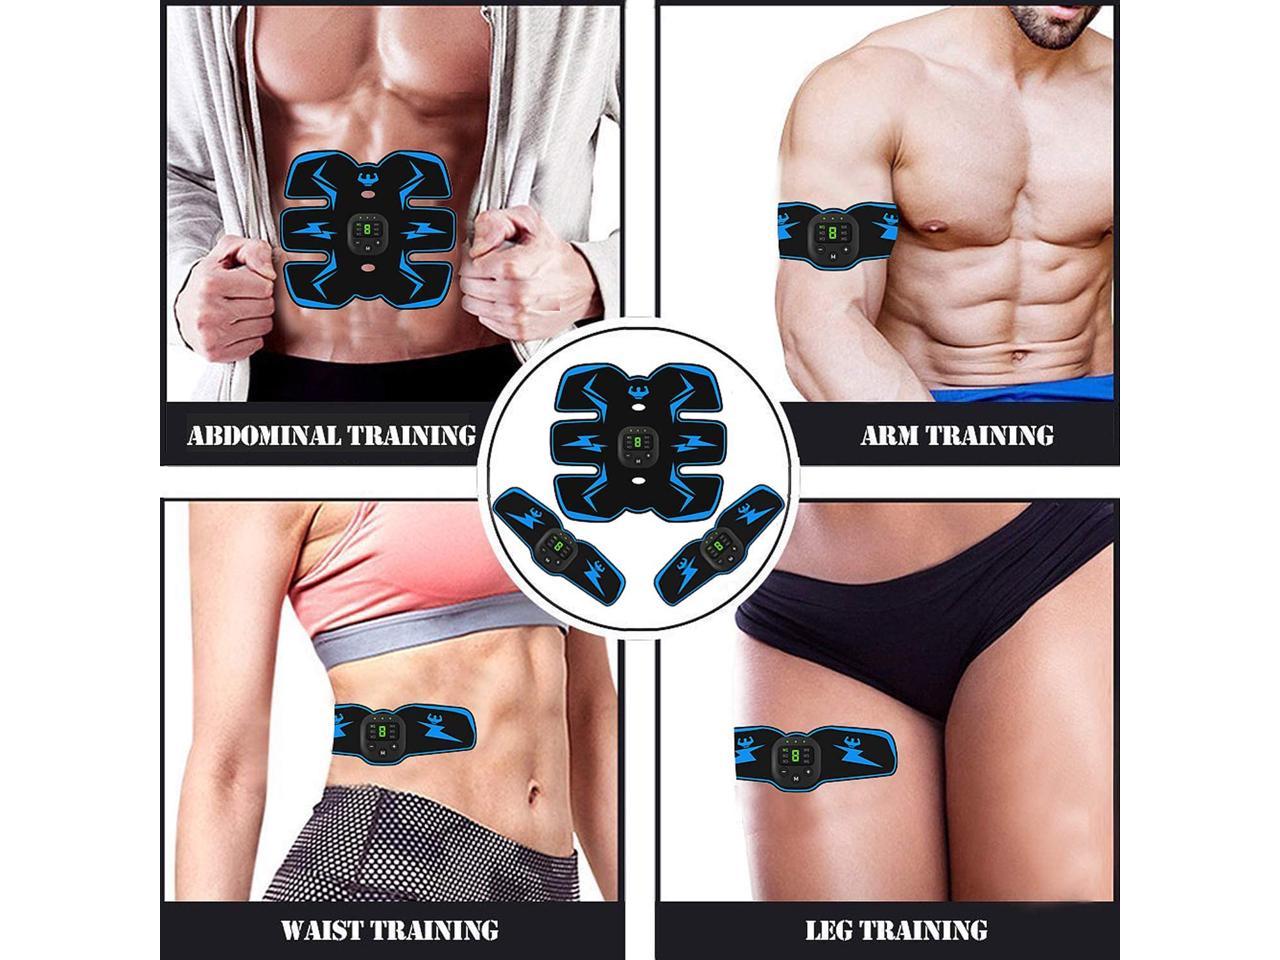 EMS Muscle Stimulator iOS Android 6 Pack Pad ABS Lose Fat Strength Trainer Toner